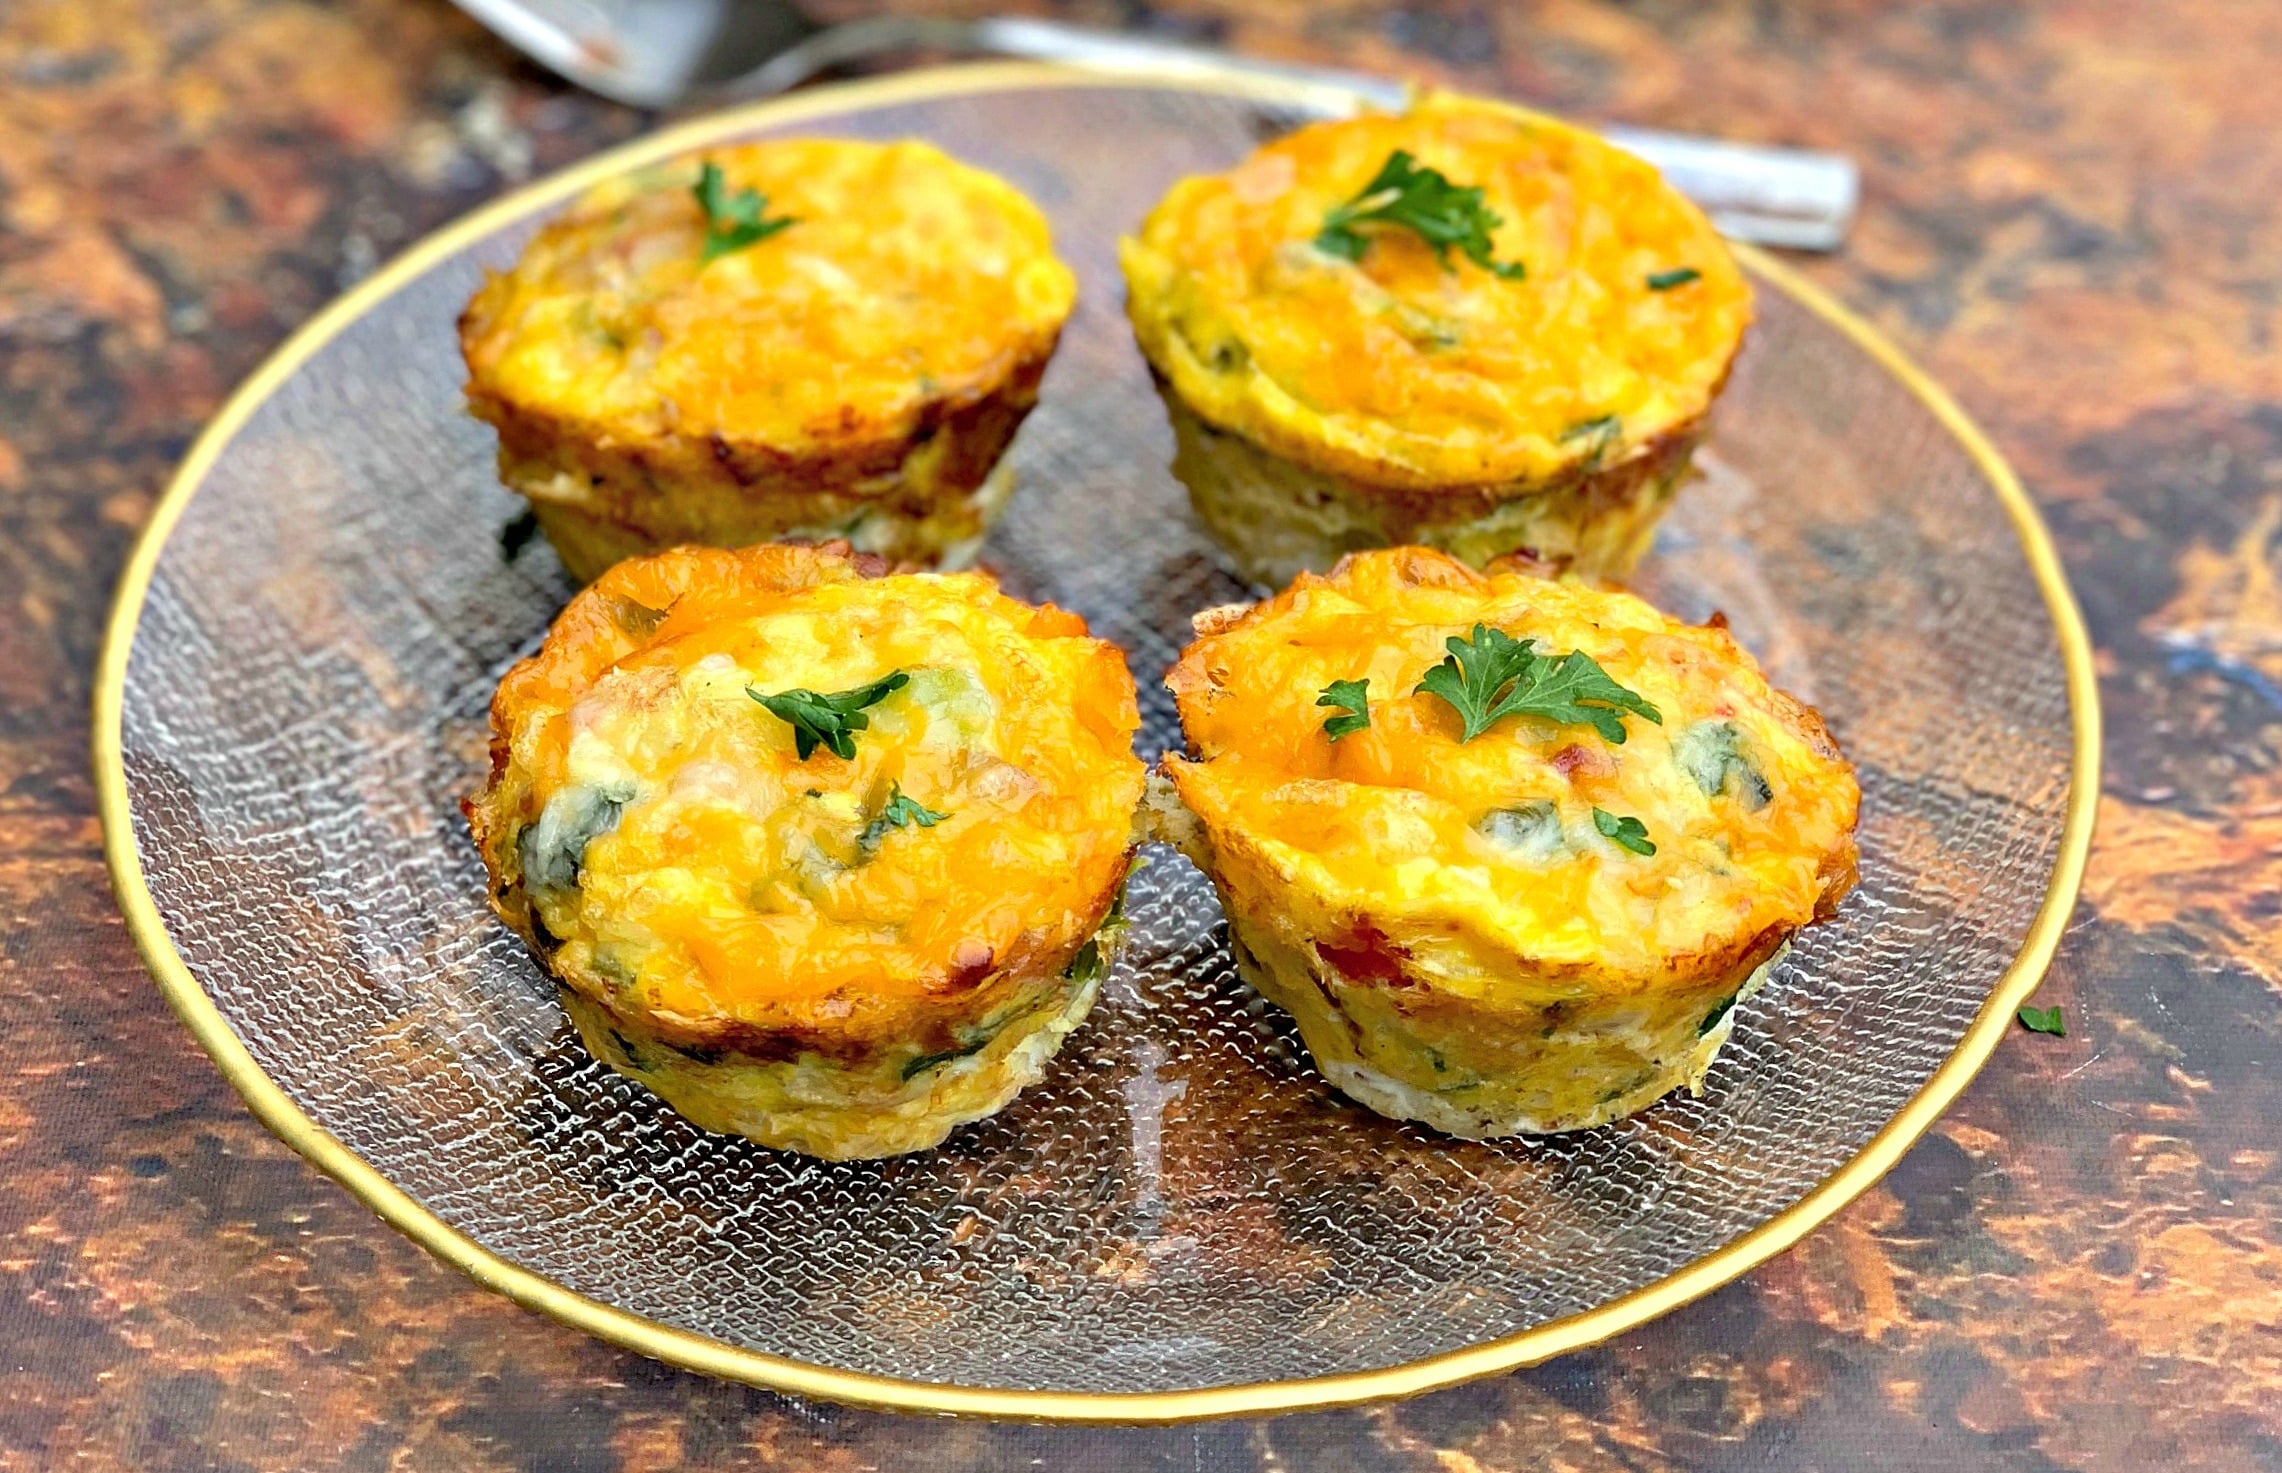 Creating Delicious Breakfast Muffins: A Step-by-Step Guide | KAFE HEALTHY